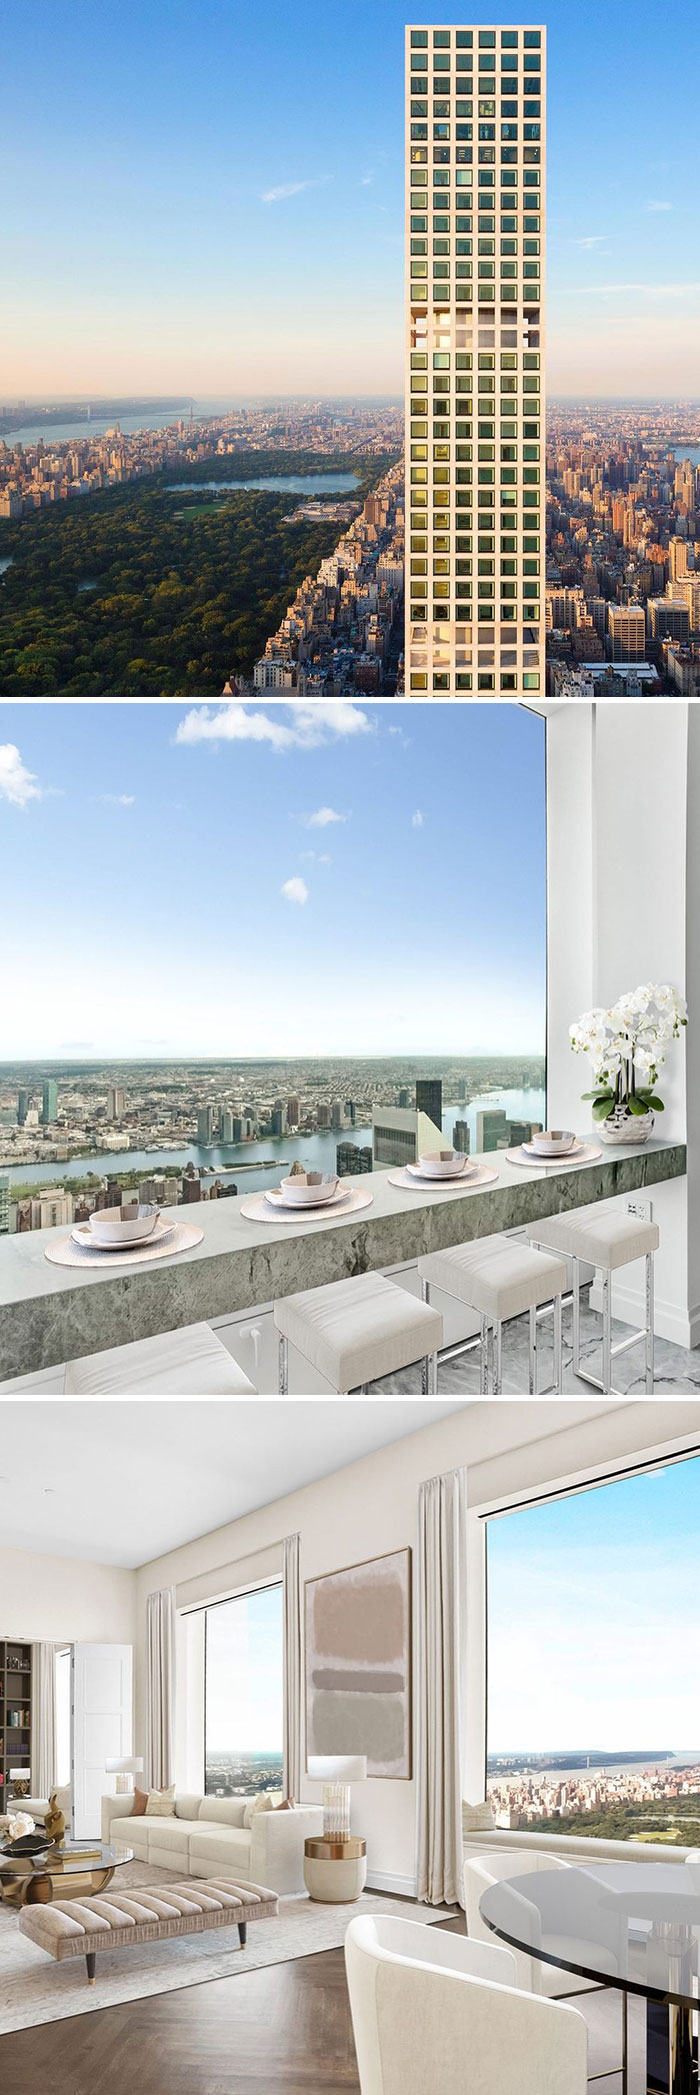 Welcome To The Hellscape That Is 432 Park Avenue In New York City